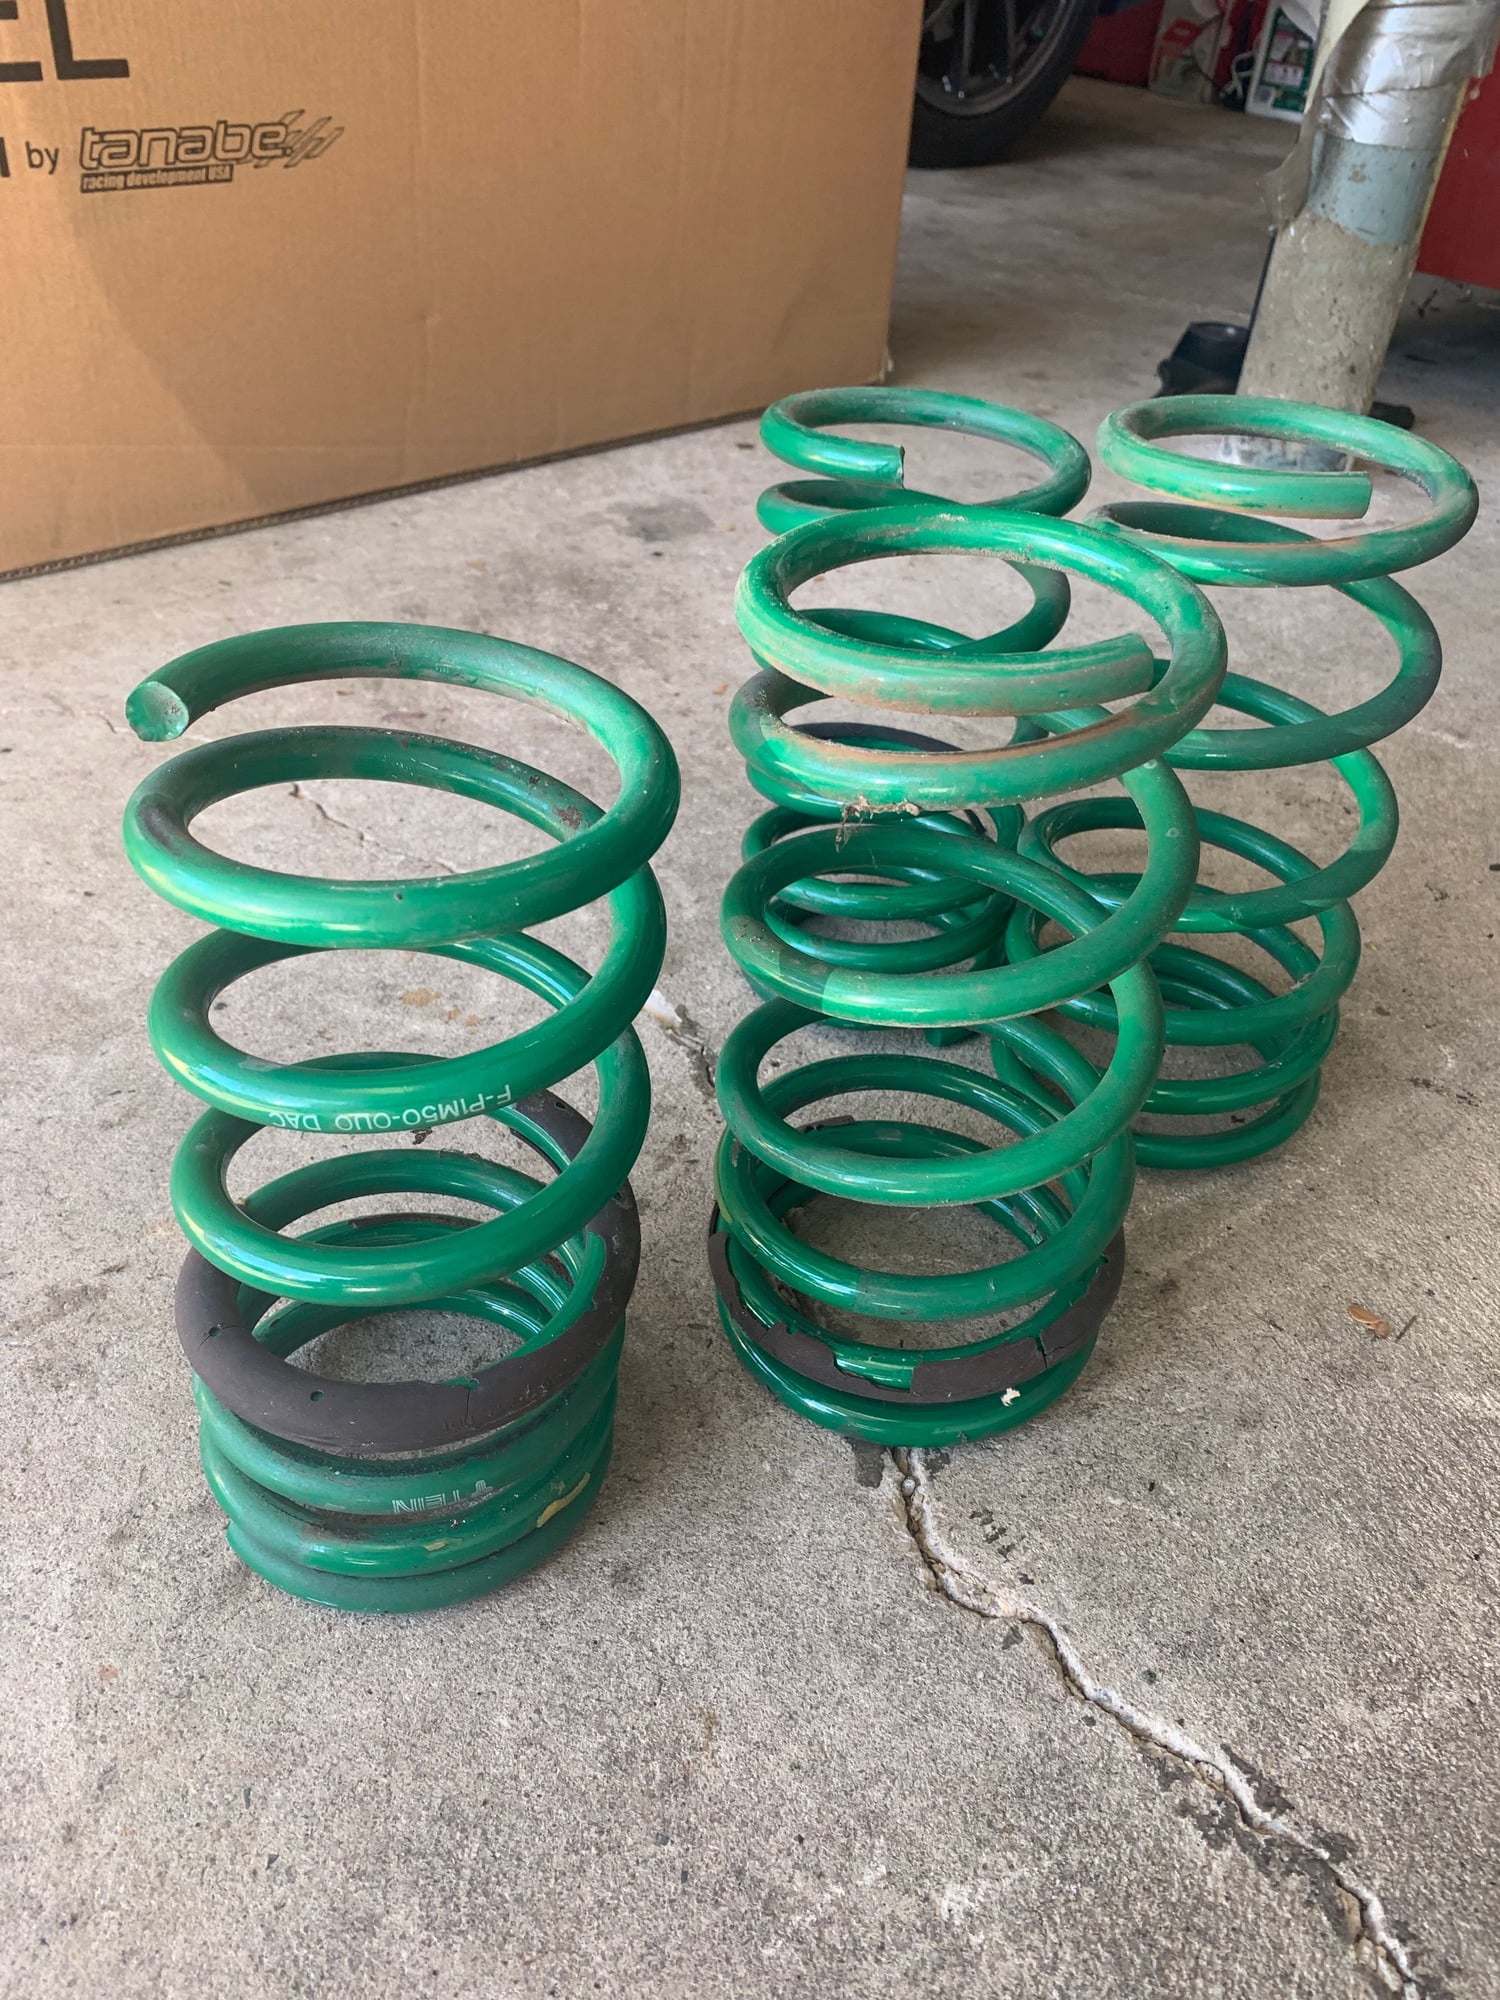 Steering/Suspension - FD - Used Tein S. Tech lowering Springs - Used - 1993 to 1995 Mazda RX-7 - Middletown, DE 19709, United States